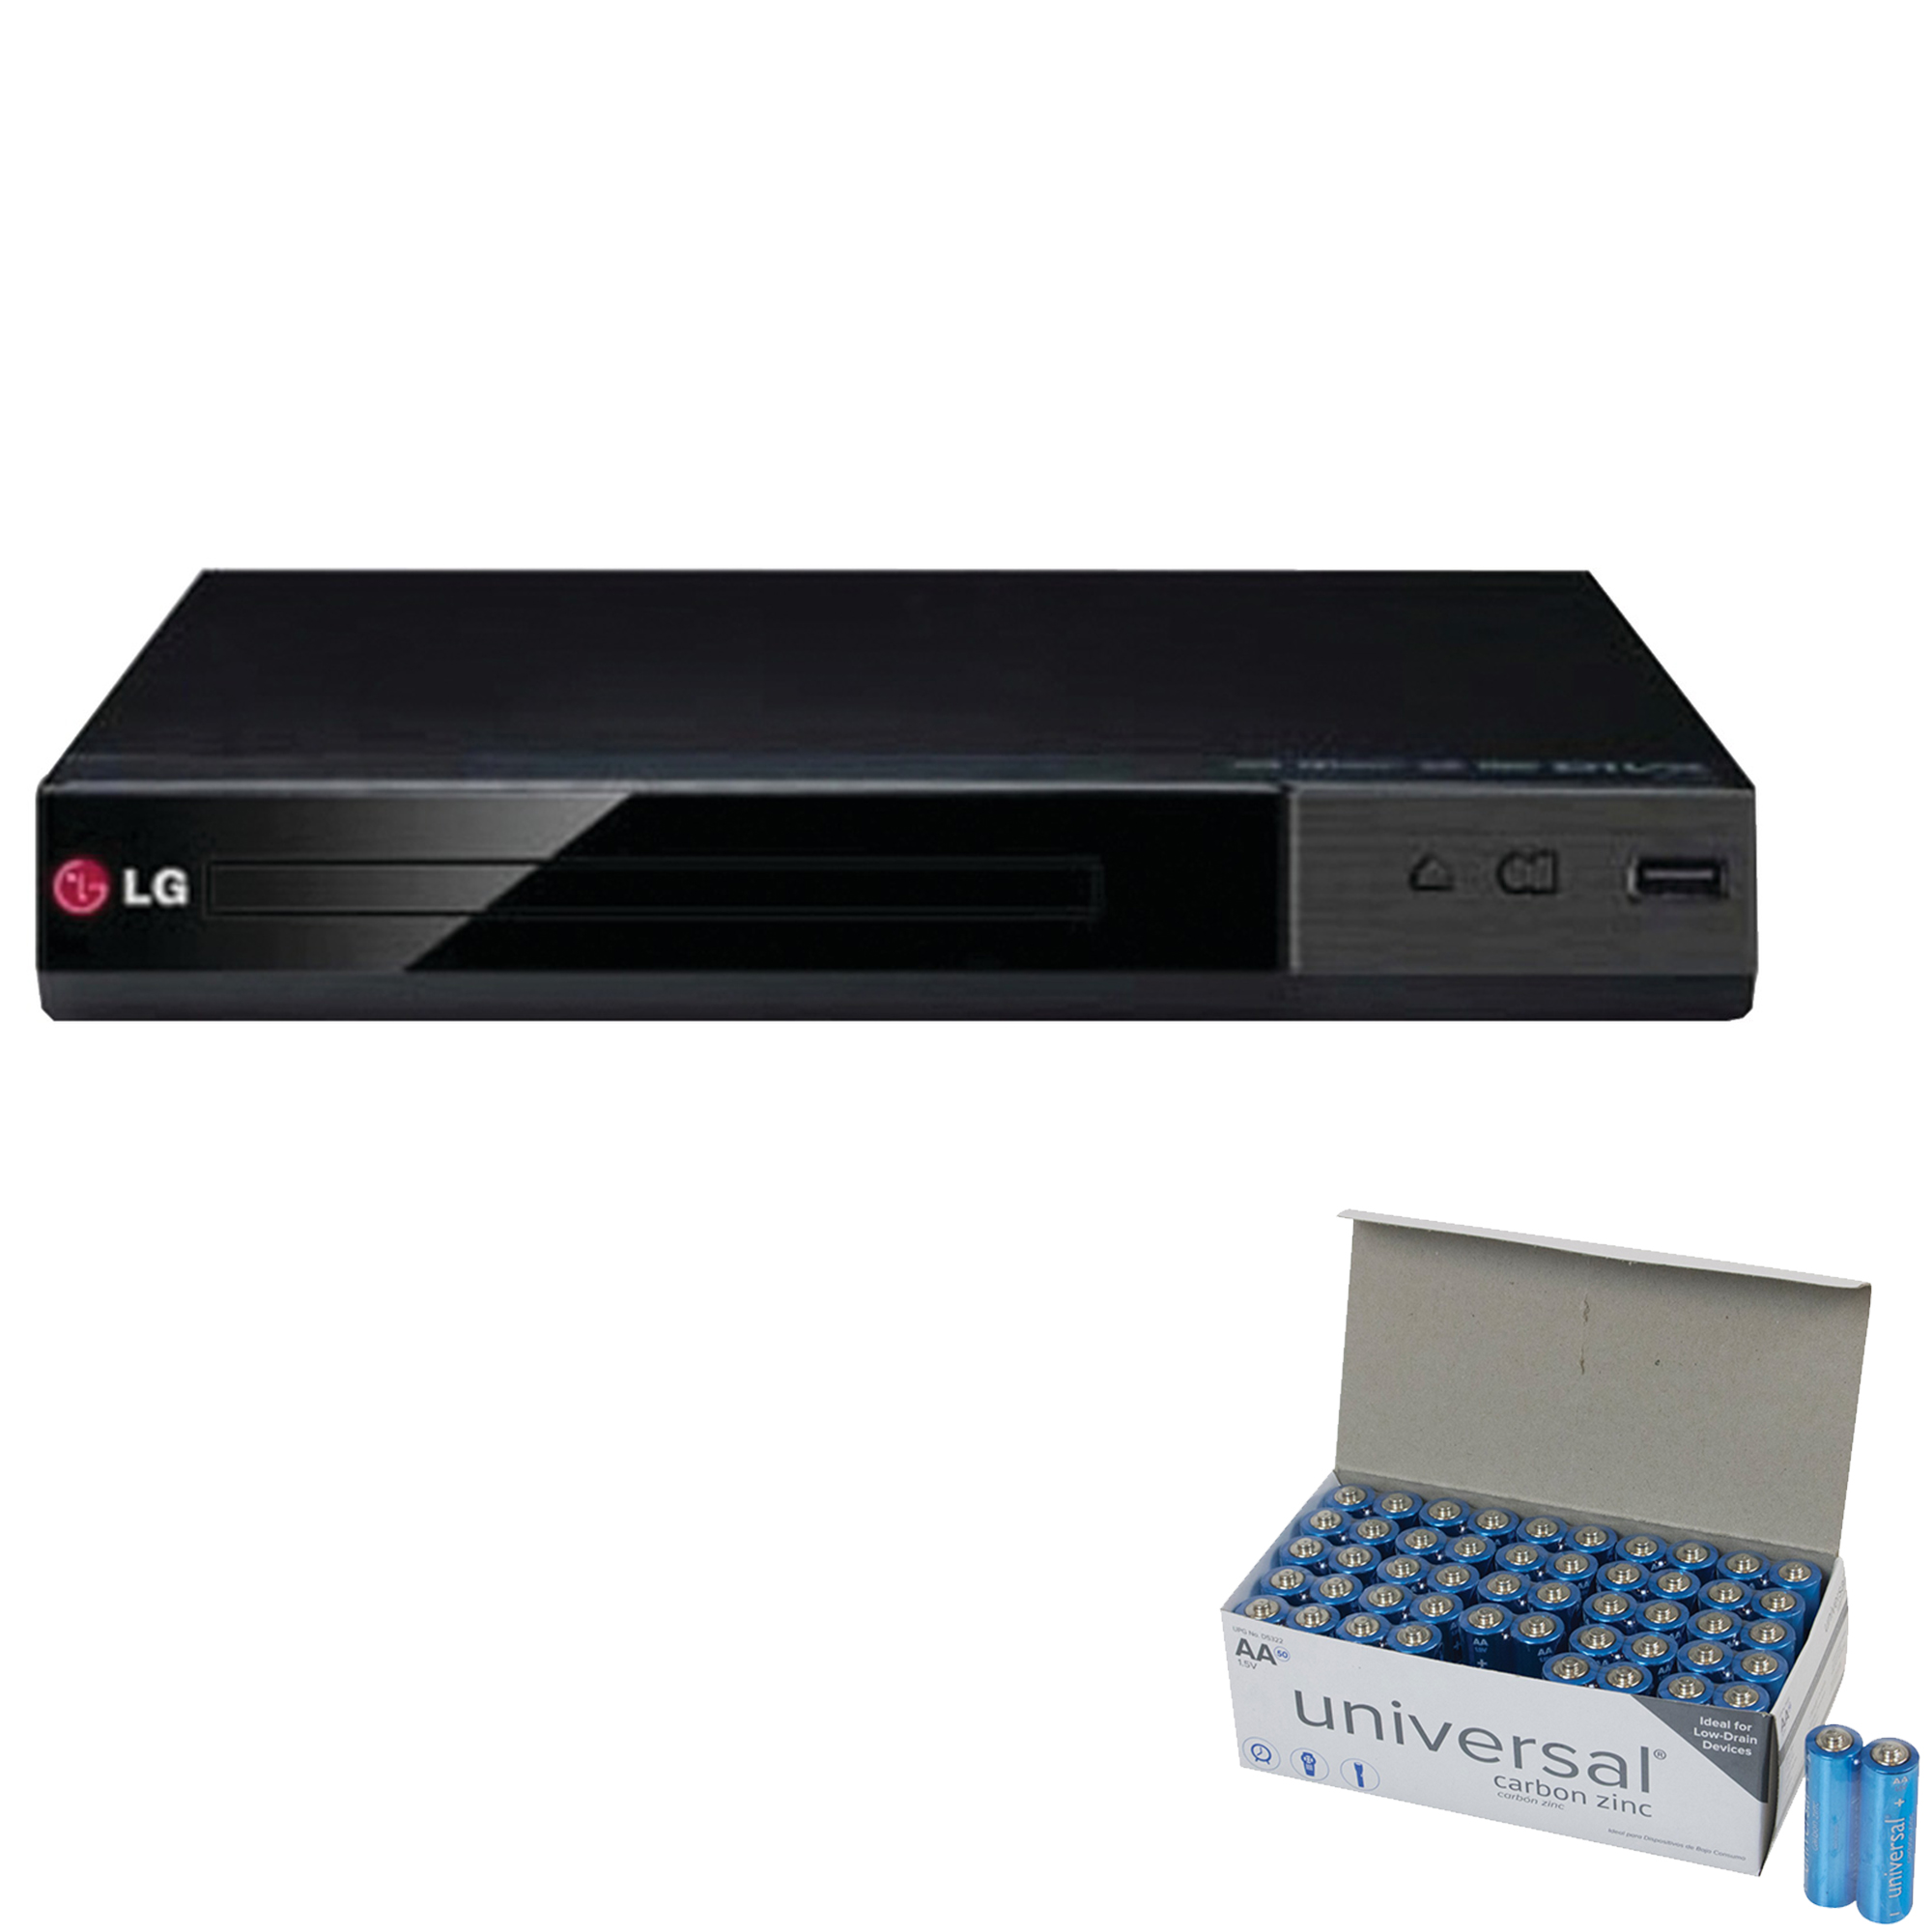 LG DP132 DVD Player With USB Direct Recording & UPG AA 50 Pack - image 1 of 3